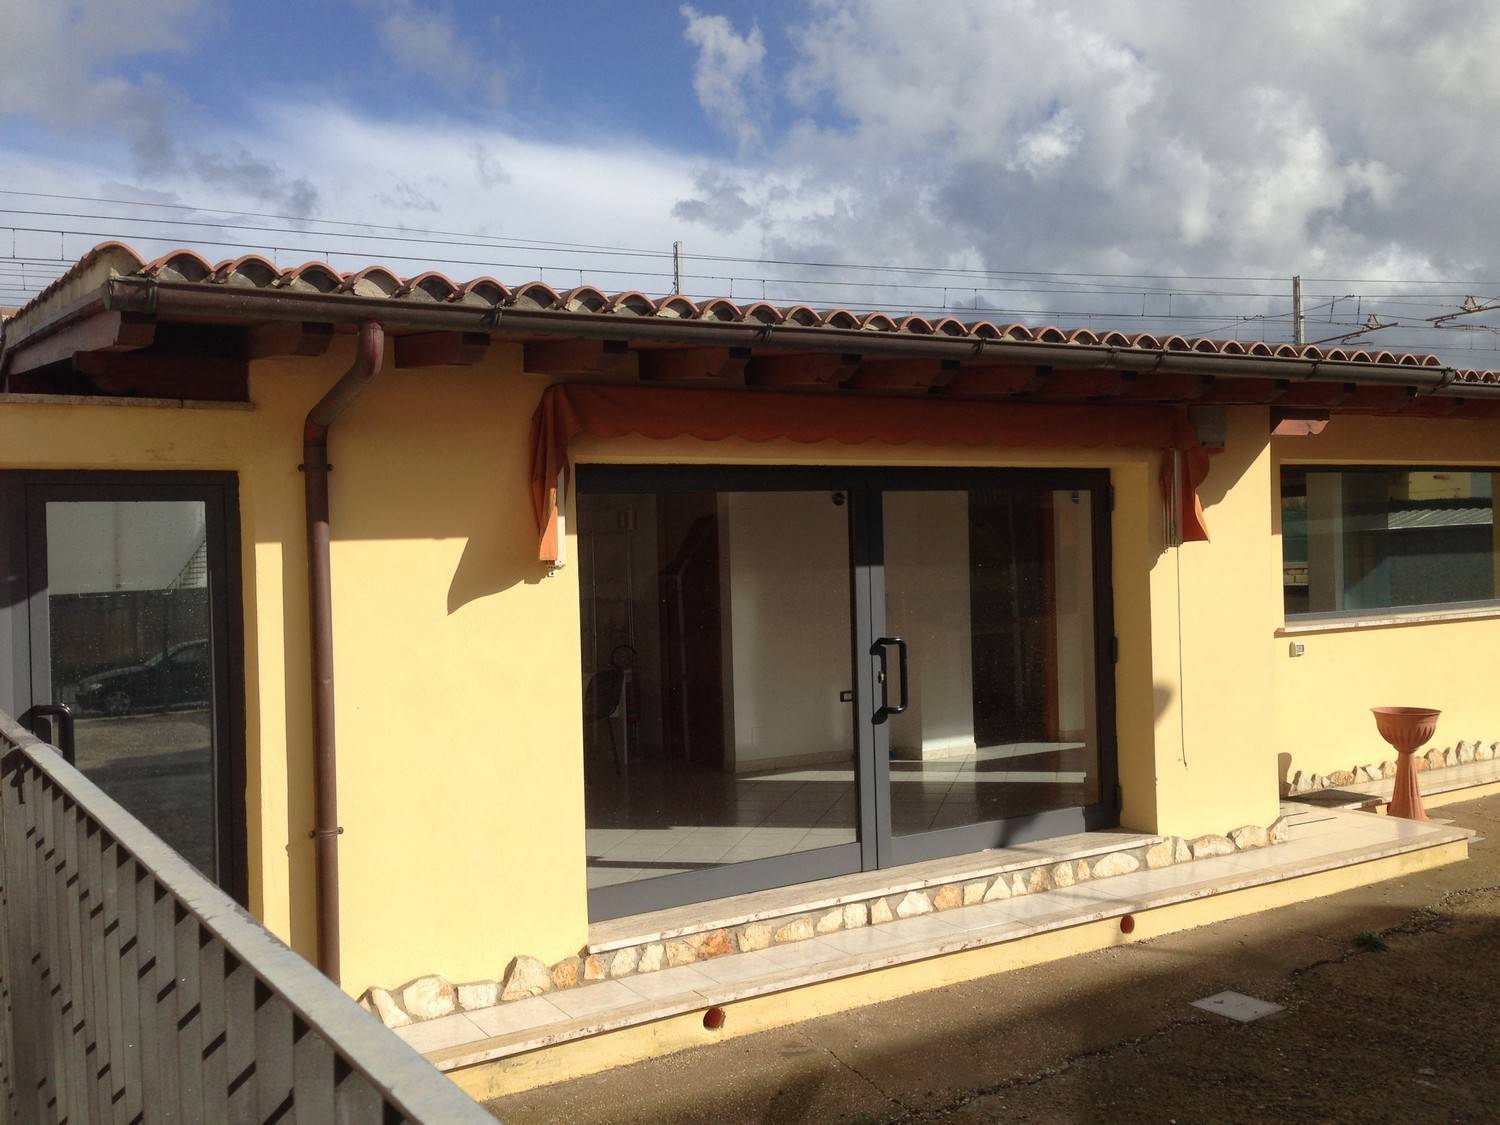 BORGATA AURELIA, CIVITAVECCHIA, Commercial property for sale of 100 Sq. mt., Excellent Condition, Heating Individual heating system, Energetic class: G, Epi: 175 kwh/m3 year, placed at Ground, 